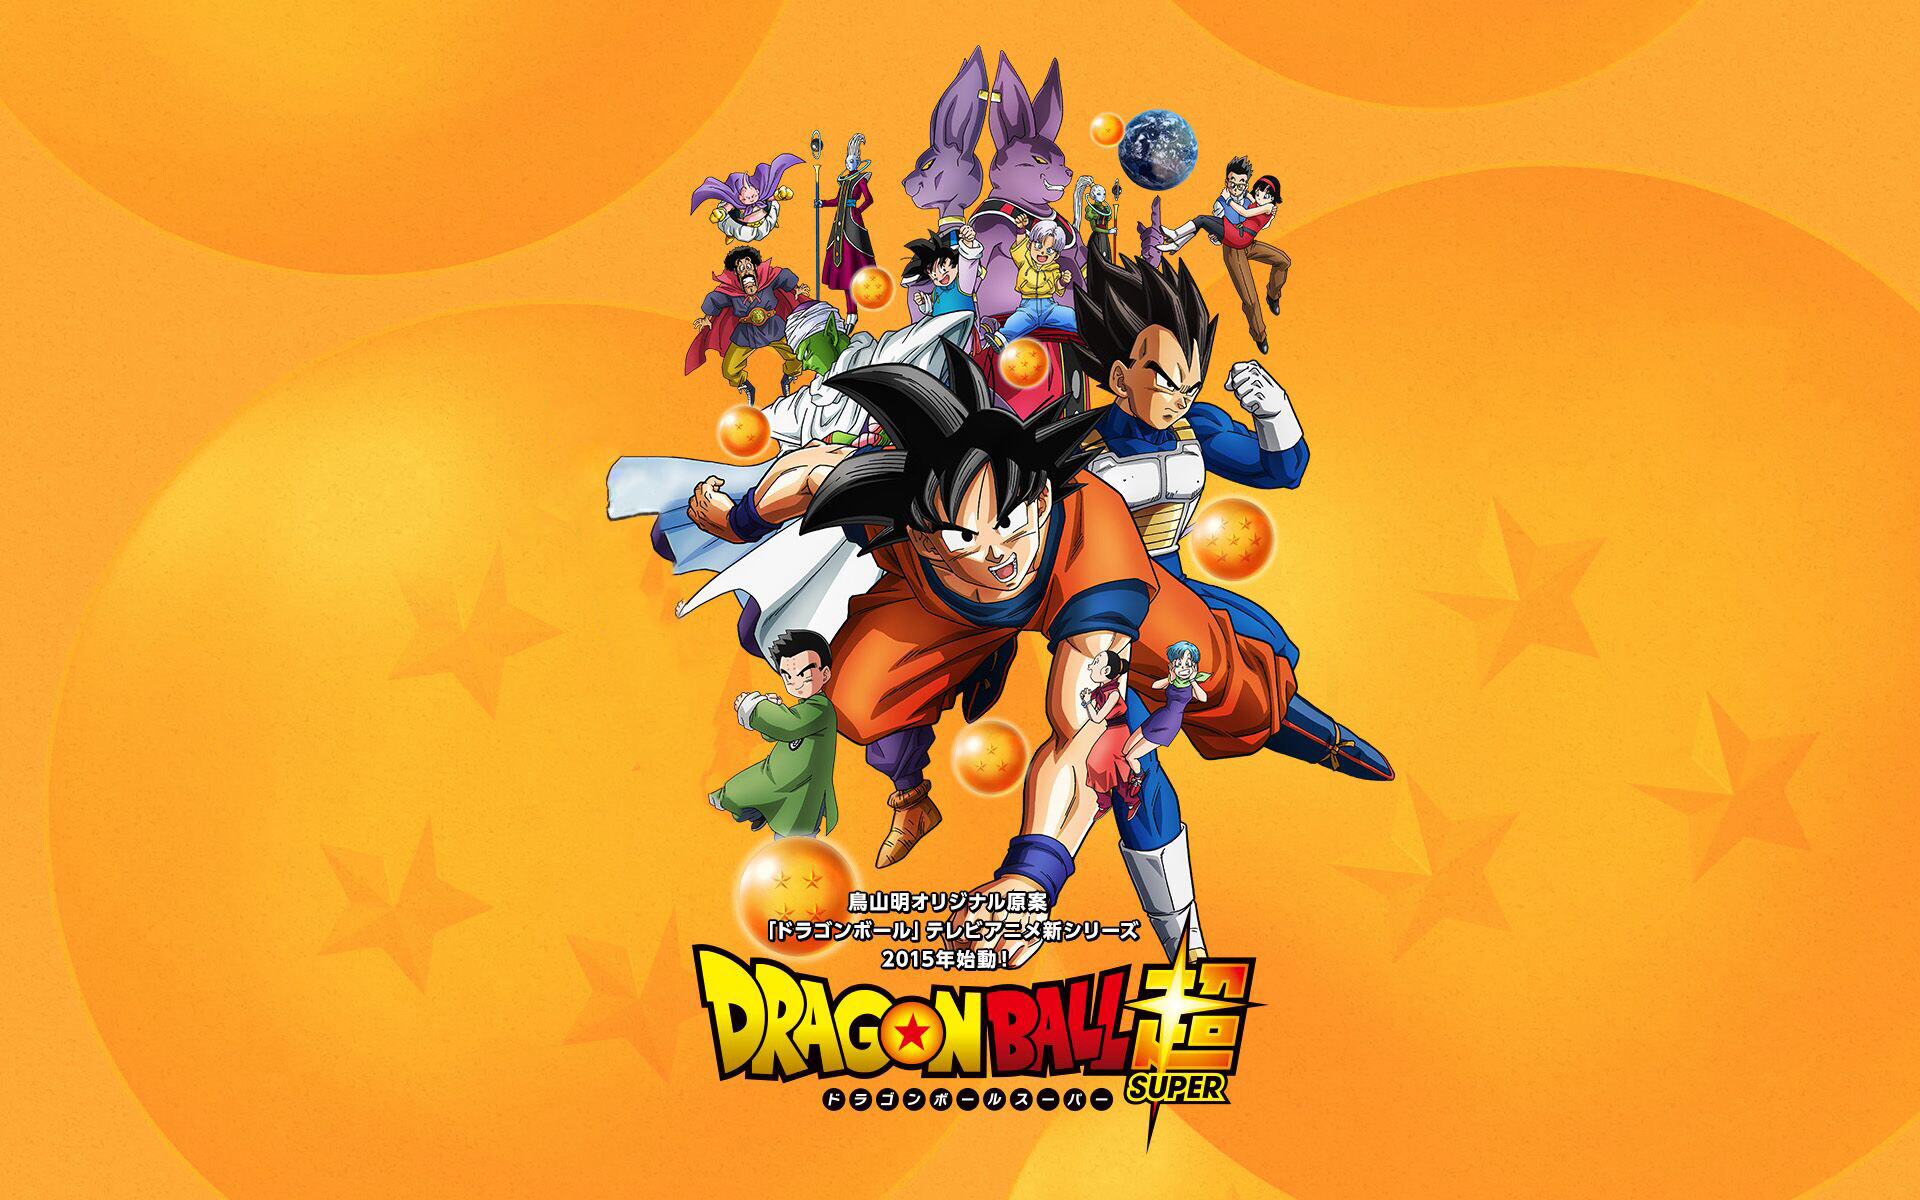 Check out our gallery with 50 amazing wallpapers of the newest success of  the Dragon Ball franchise.